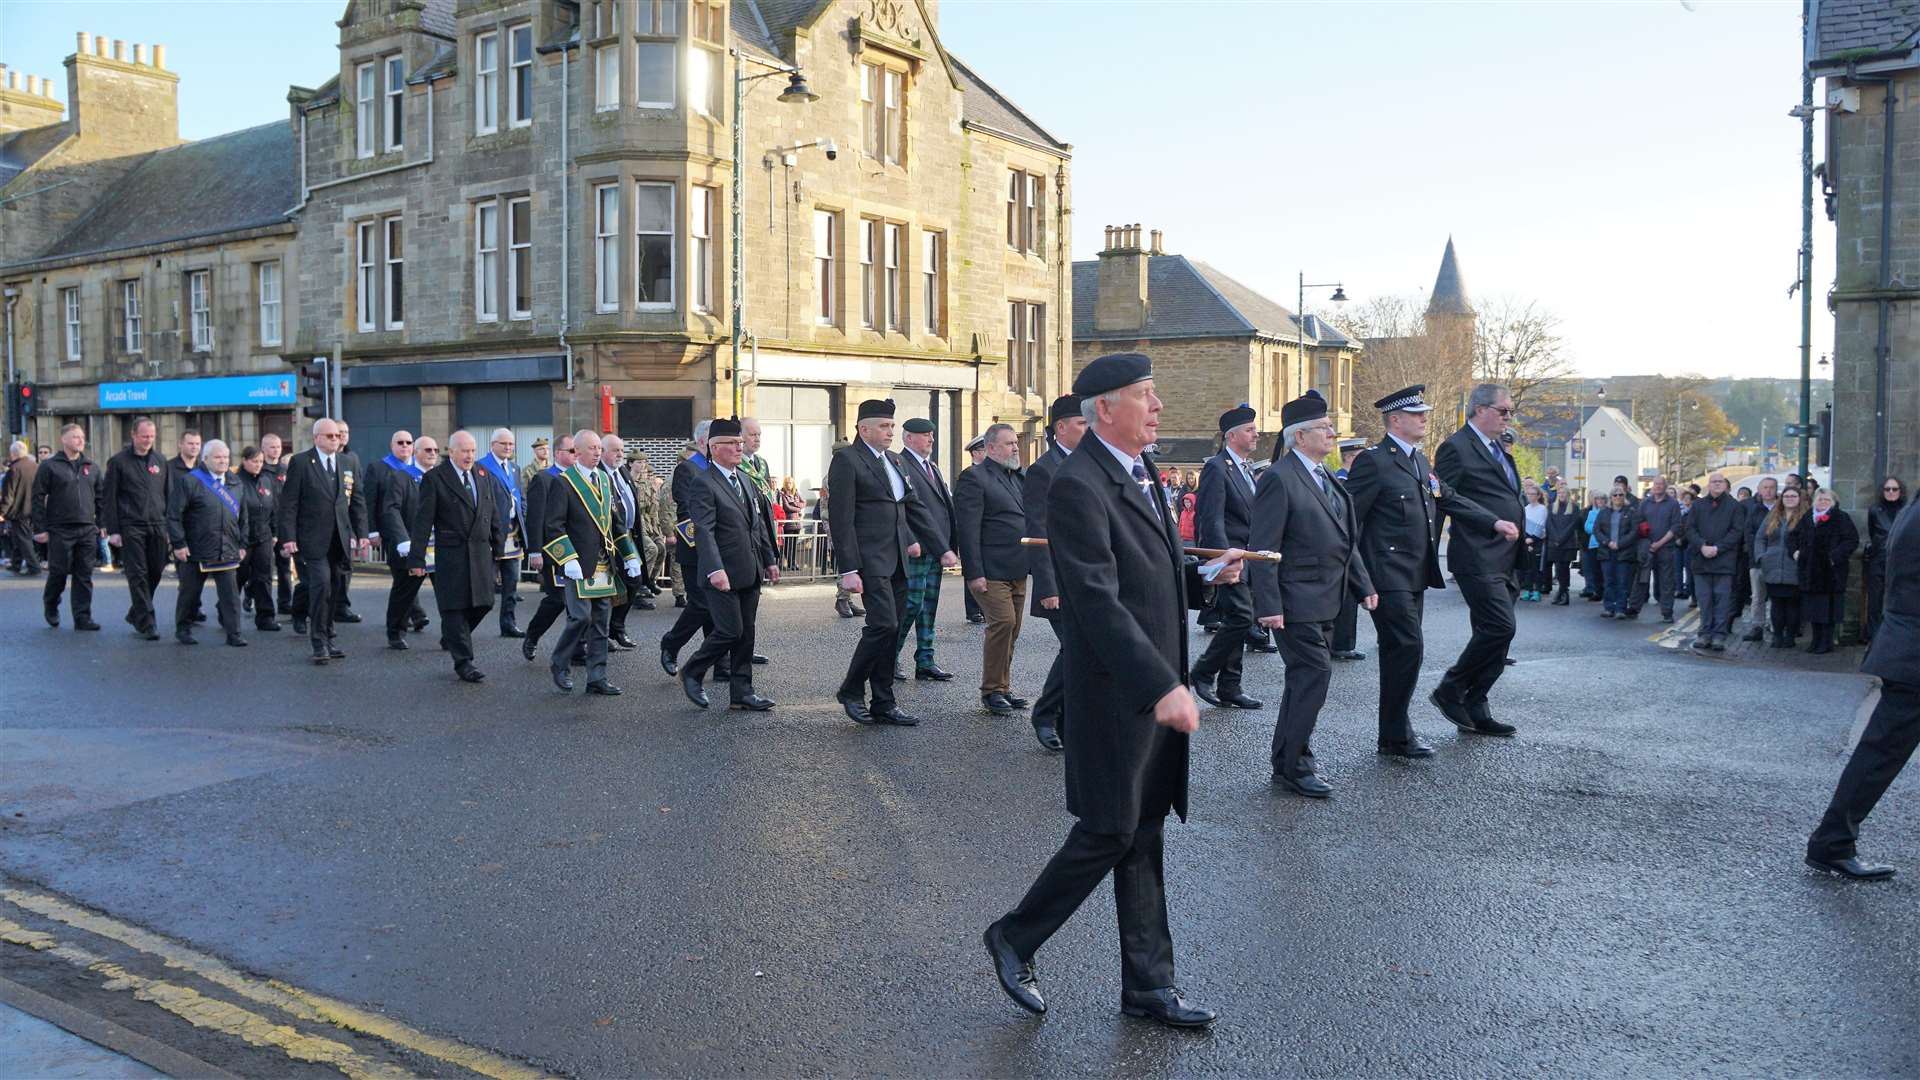 Parade members move off from the war memorial at the end of the service in Sir John's Square. Picture: DGS